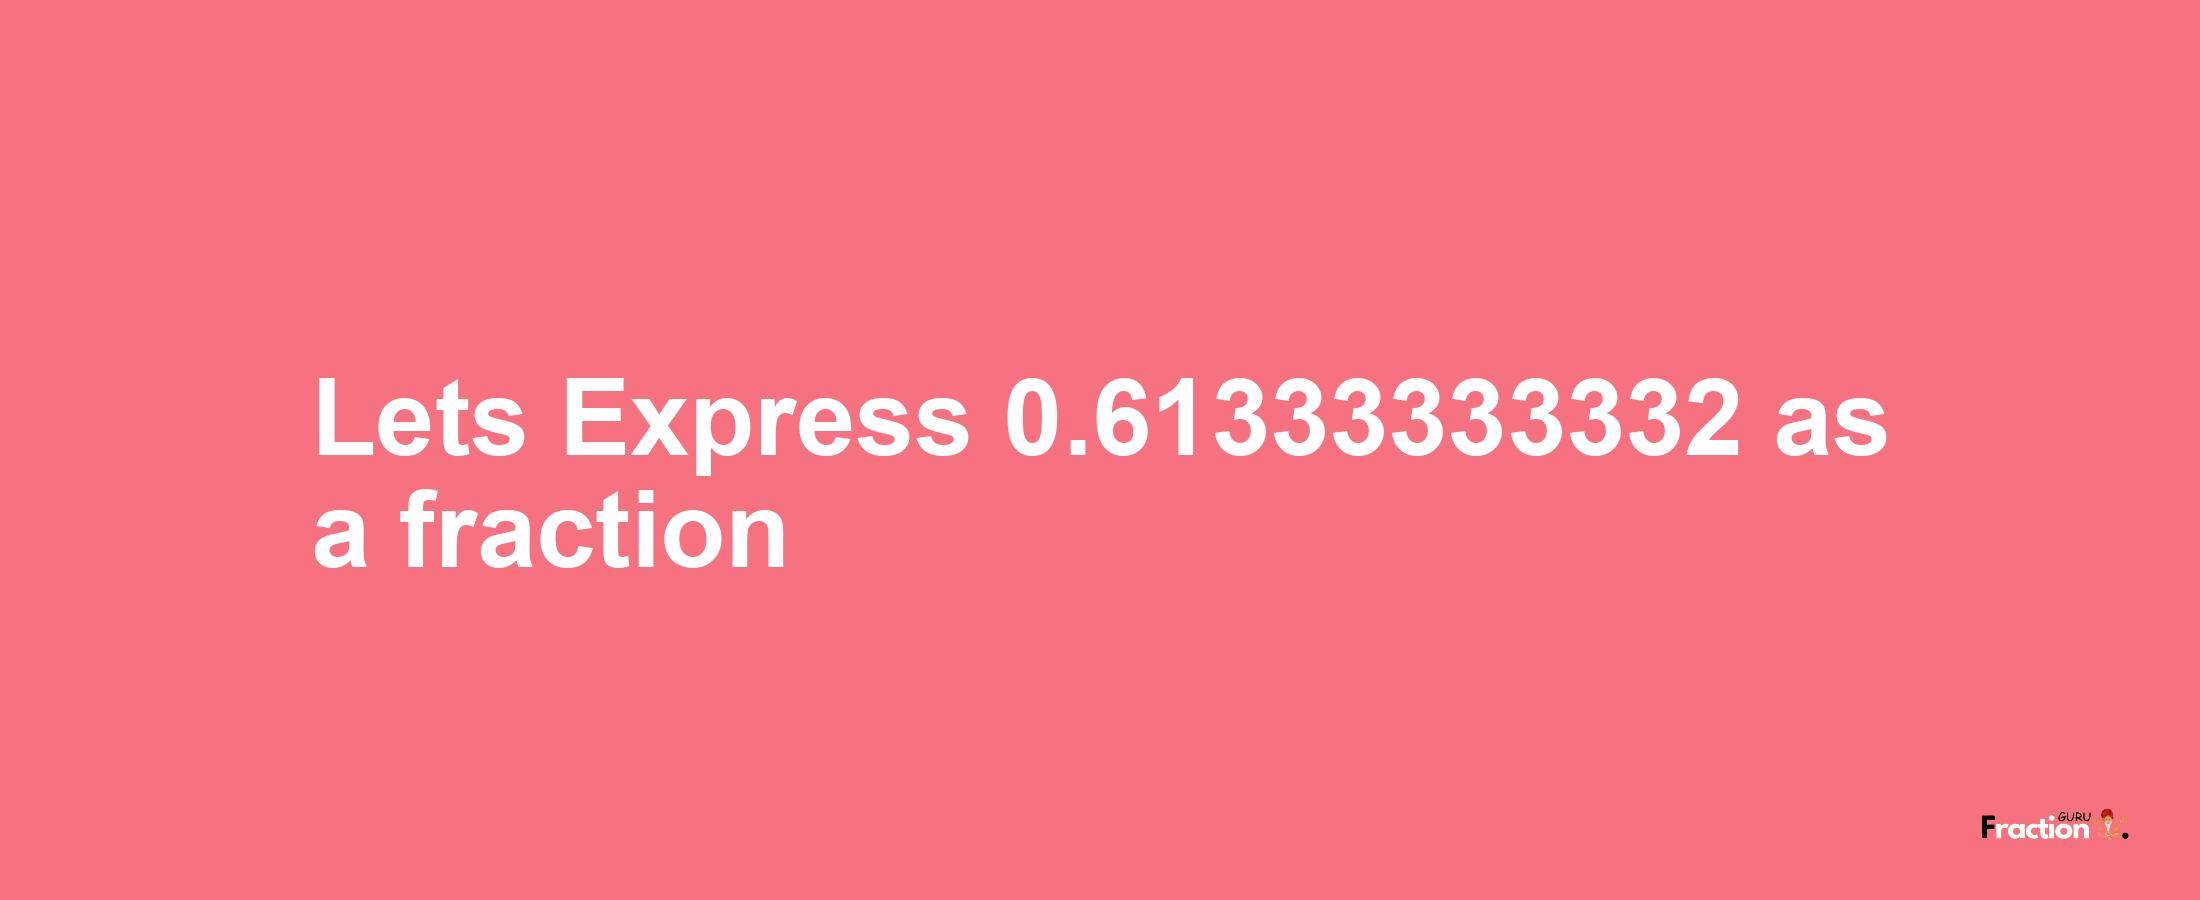 Lets Express 0.61333333332 as afraction